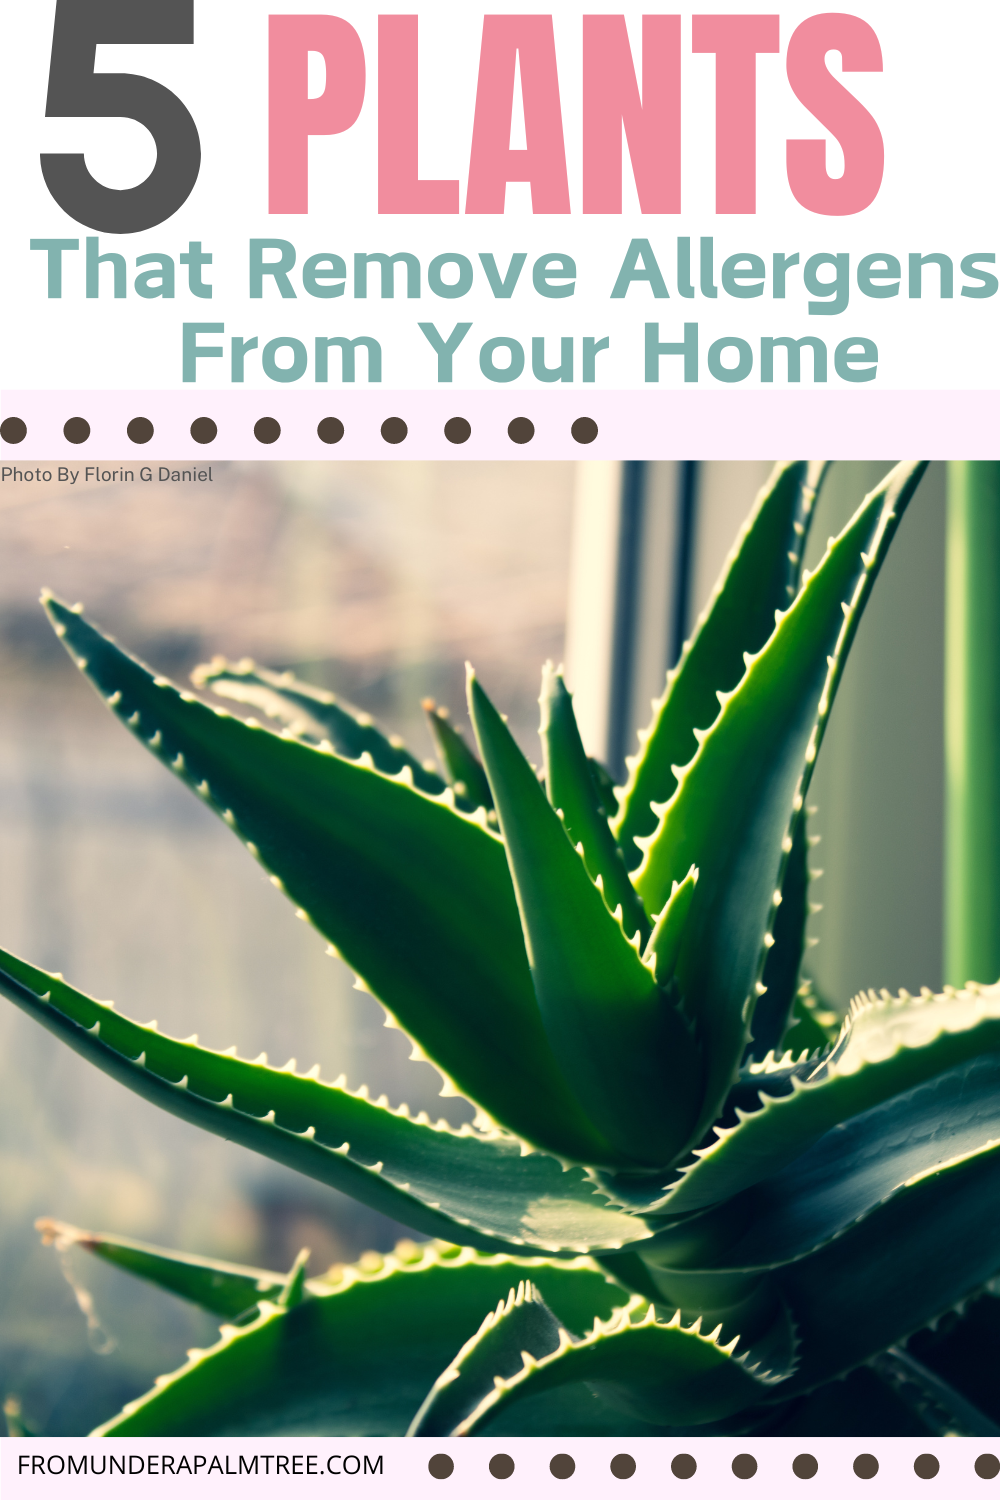 best plants for allergies and asthma | outdoor plants that remove allergens | indoor plants that remove allergens | best indoor plants for allergies and asthma | plants tha help with dust allergies | worst indoor plants for allergies | indoor plants allergy symptoms | best outdoor plants for allergy sufferers | plants that removes mold | plants that remove negative energy | plants that remove negative energy | plants that remove moisture | plants that remove readiation | plants that remove odor | plants that remove black mold | remove flies from plants | how to remove pests from plants | eczema friendly house plants | plants | planting tips | indoor plant tips | how to keep plants alive | how to not kill plants | plant hacks | gardening tips | gardening hacks | spider plants | snake plants | peace lily | alow vera | aloe vera uses | golden pothos | how to use aloe in the home |